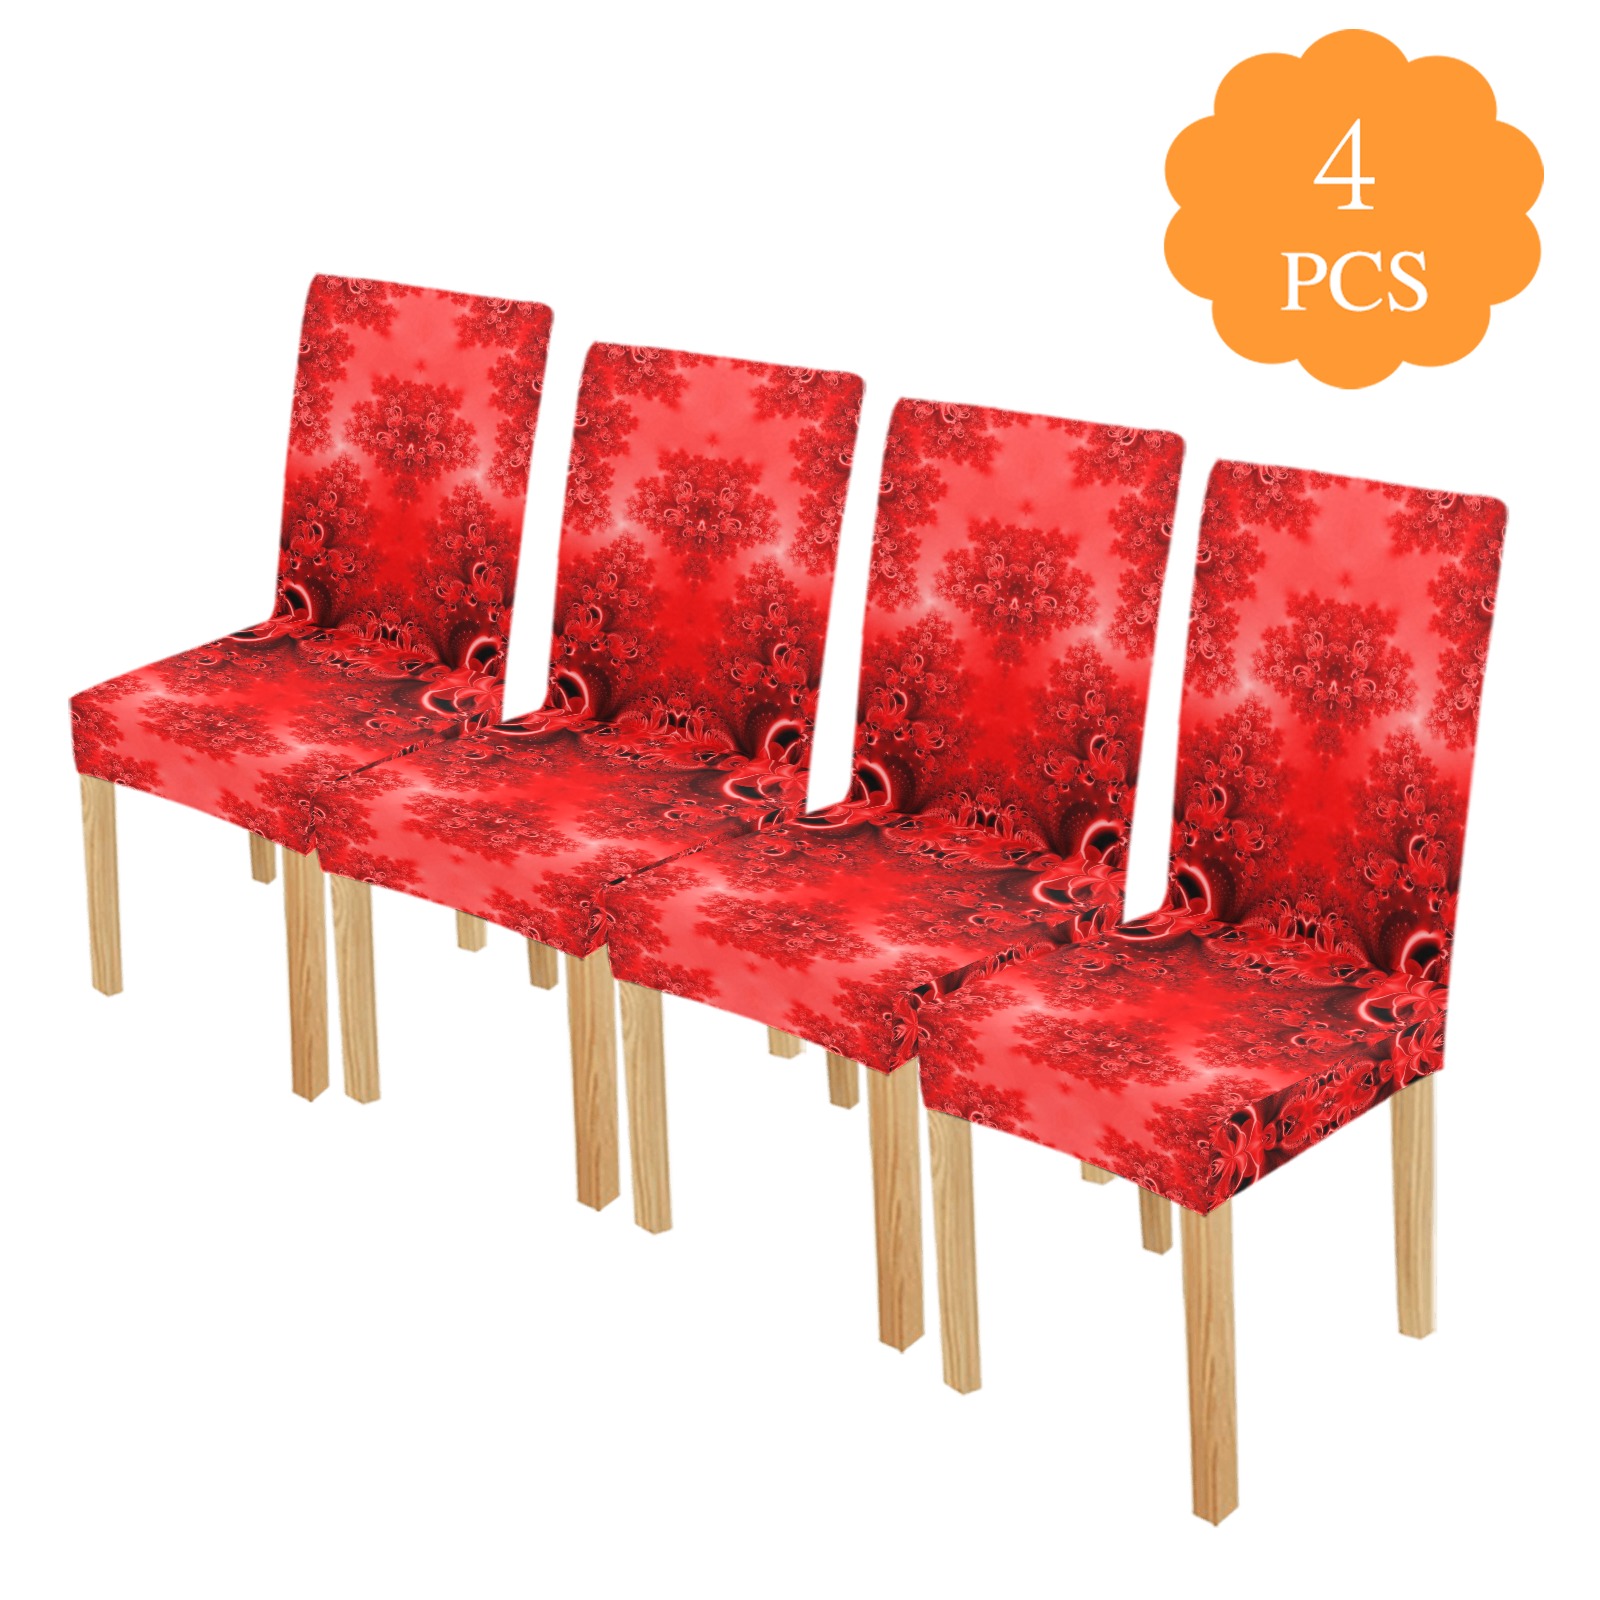 Fiery Red Rose Garden Frost Fractal Chair Cover (Pack of 4)